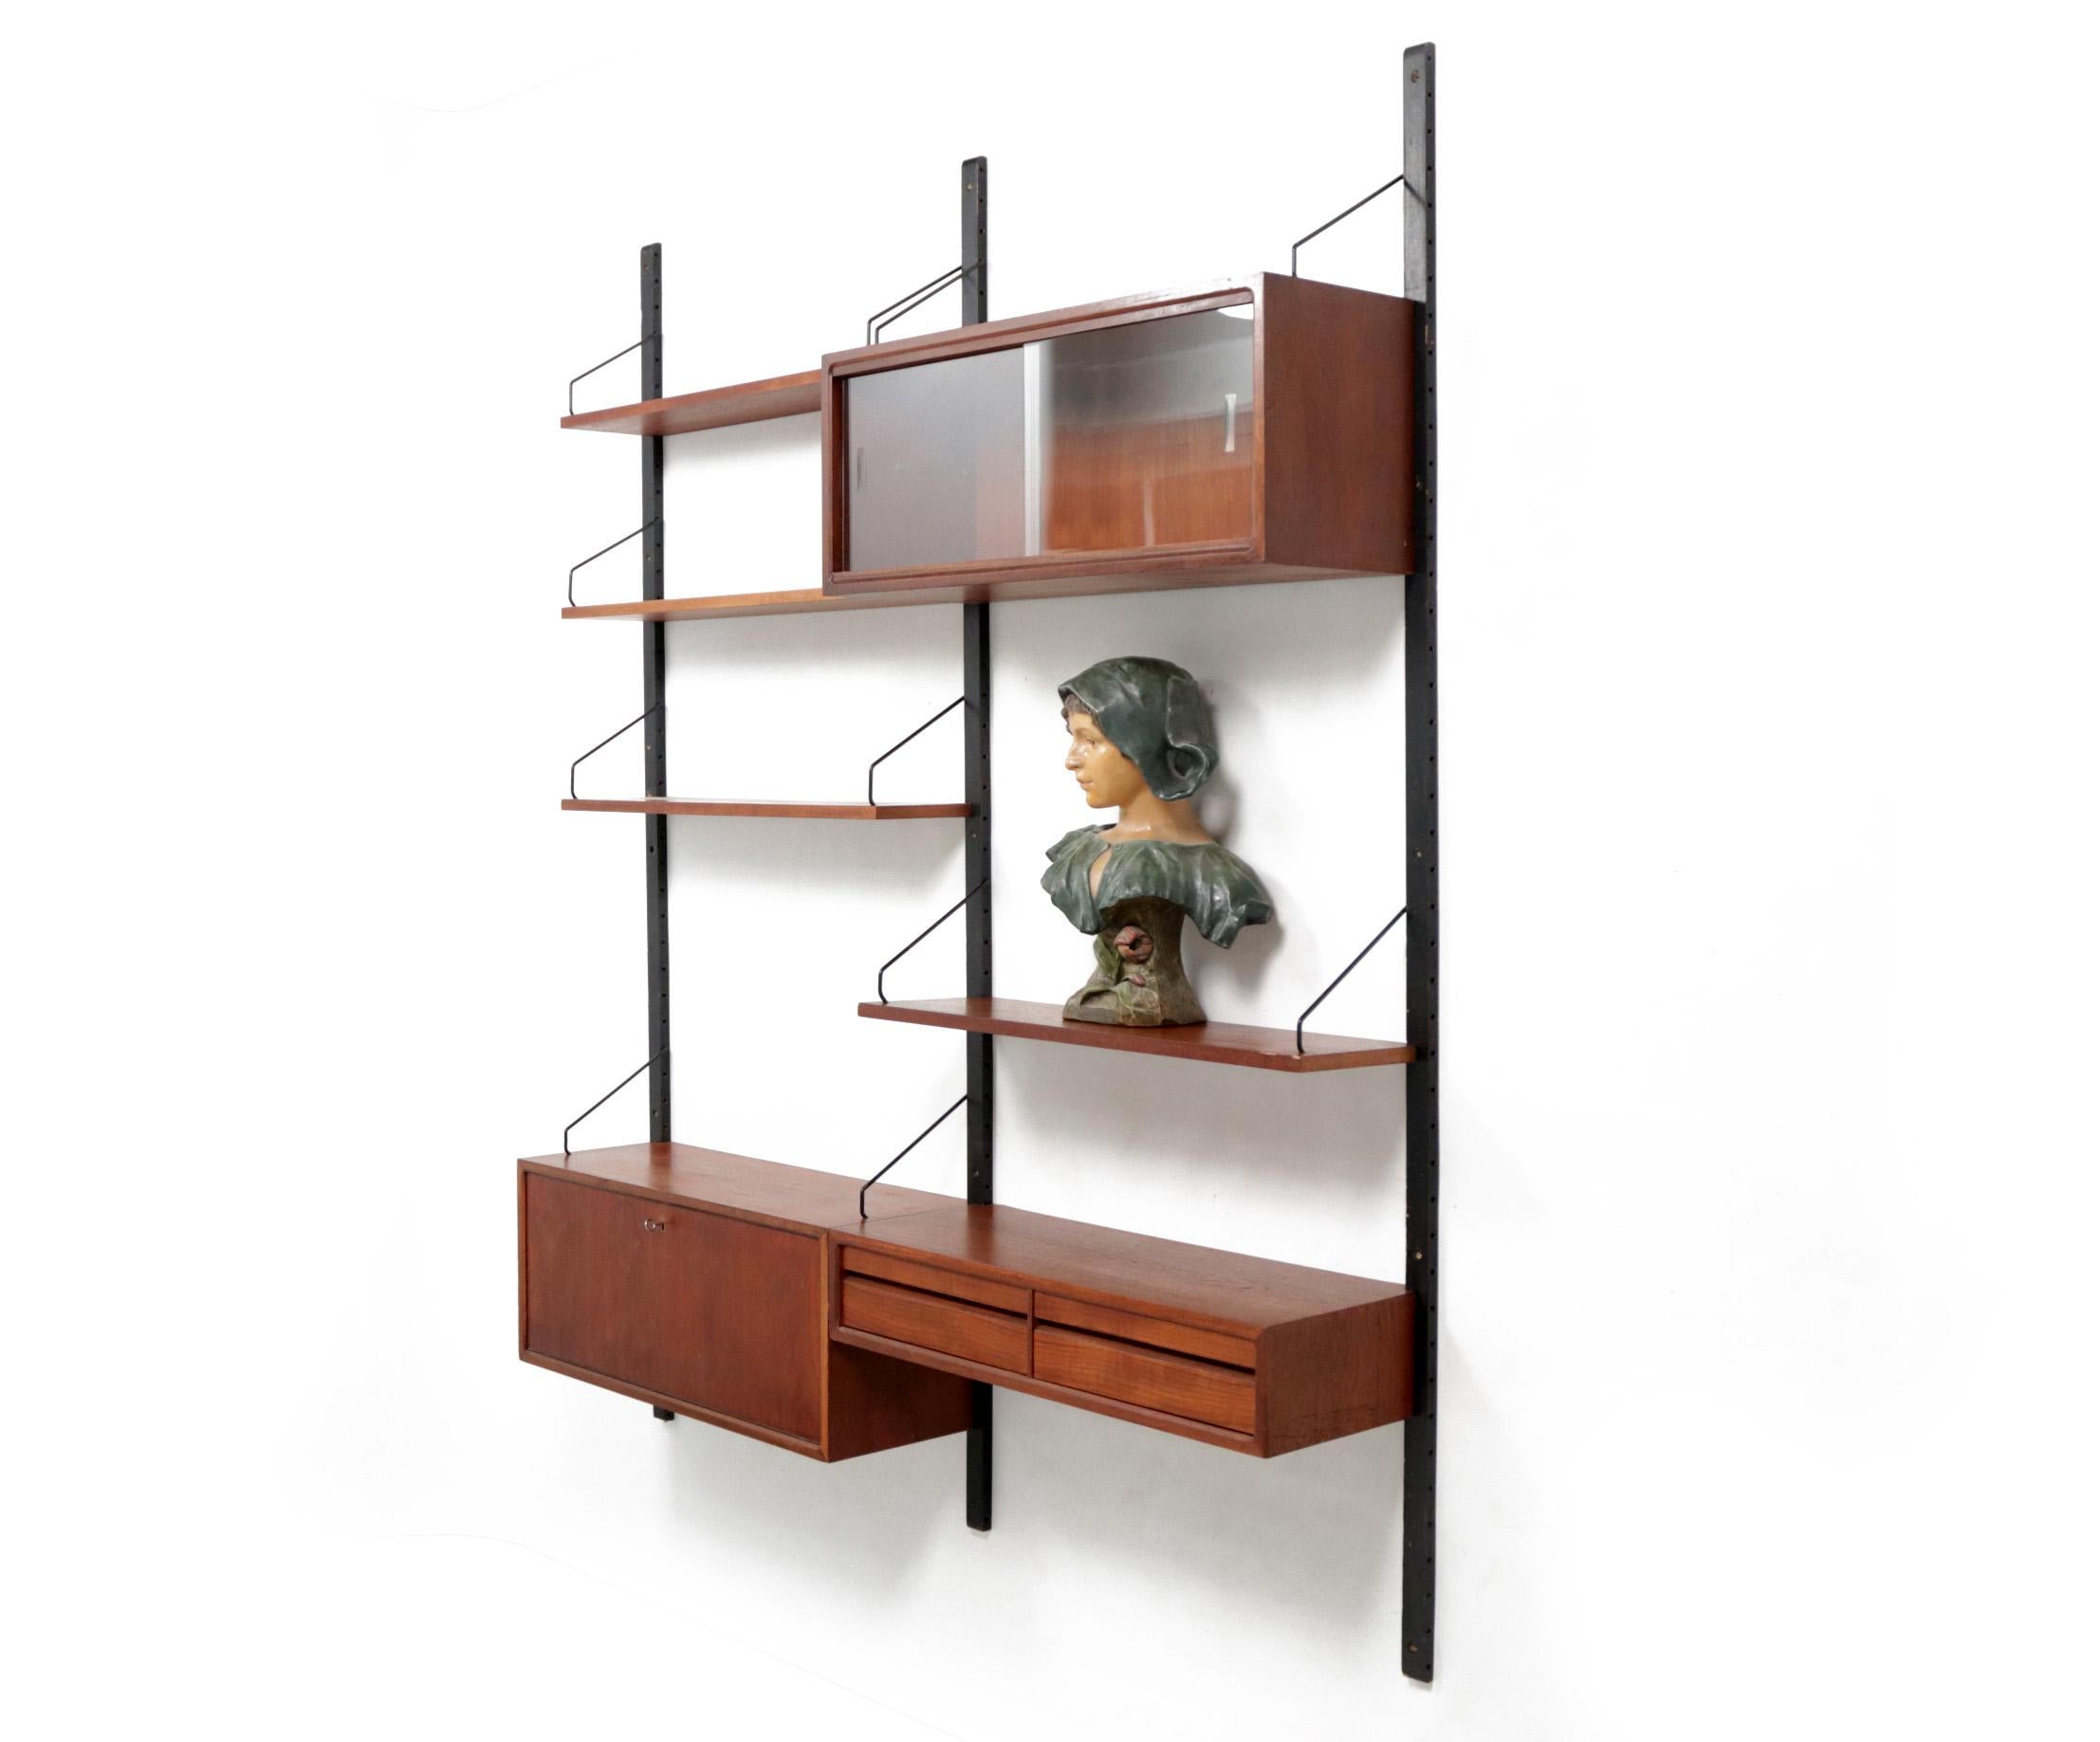 Beautiful modular floating shelving system, by Poul Cadovius for Royal System.

Display cabinet 80 x 30 x 33.5 cm
Chest of drawers 80 x 30 x 15.5 cm
Cabinet 80 x 30 x 33.5 cm
1 shelves 80 x 24.5 cm
3 shelves 80 x 20 cm.